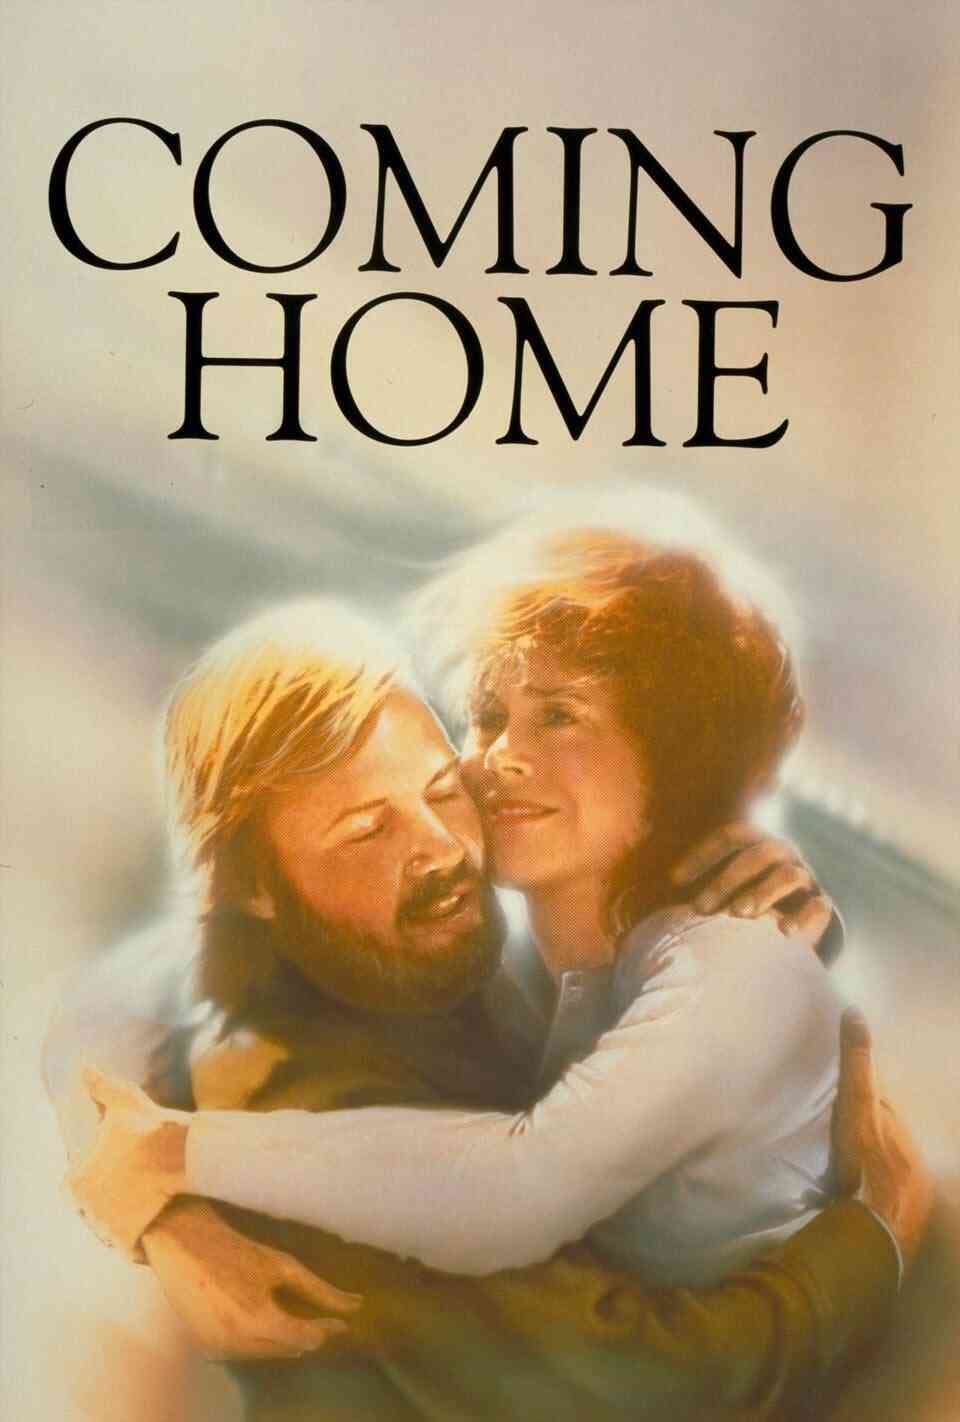 Read Coming Home screenplay (poster)